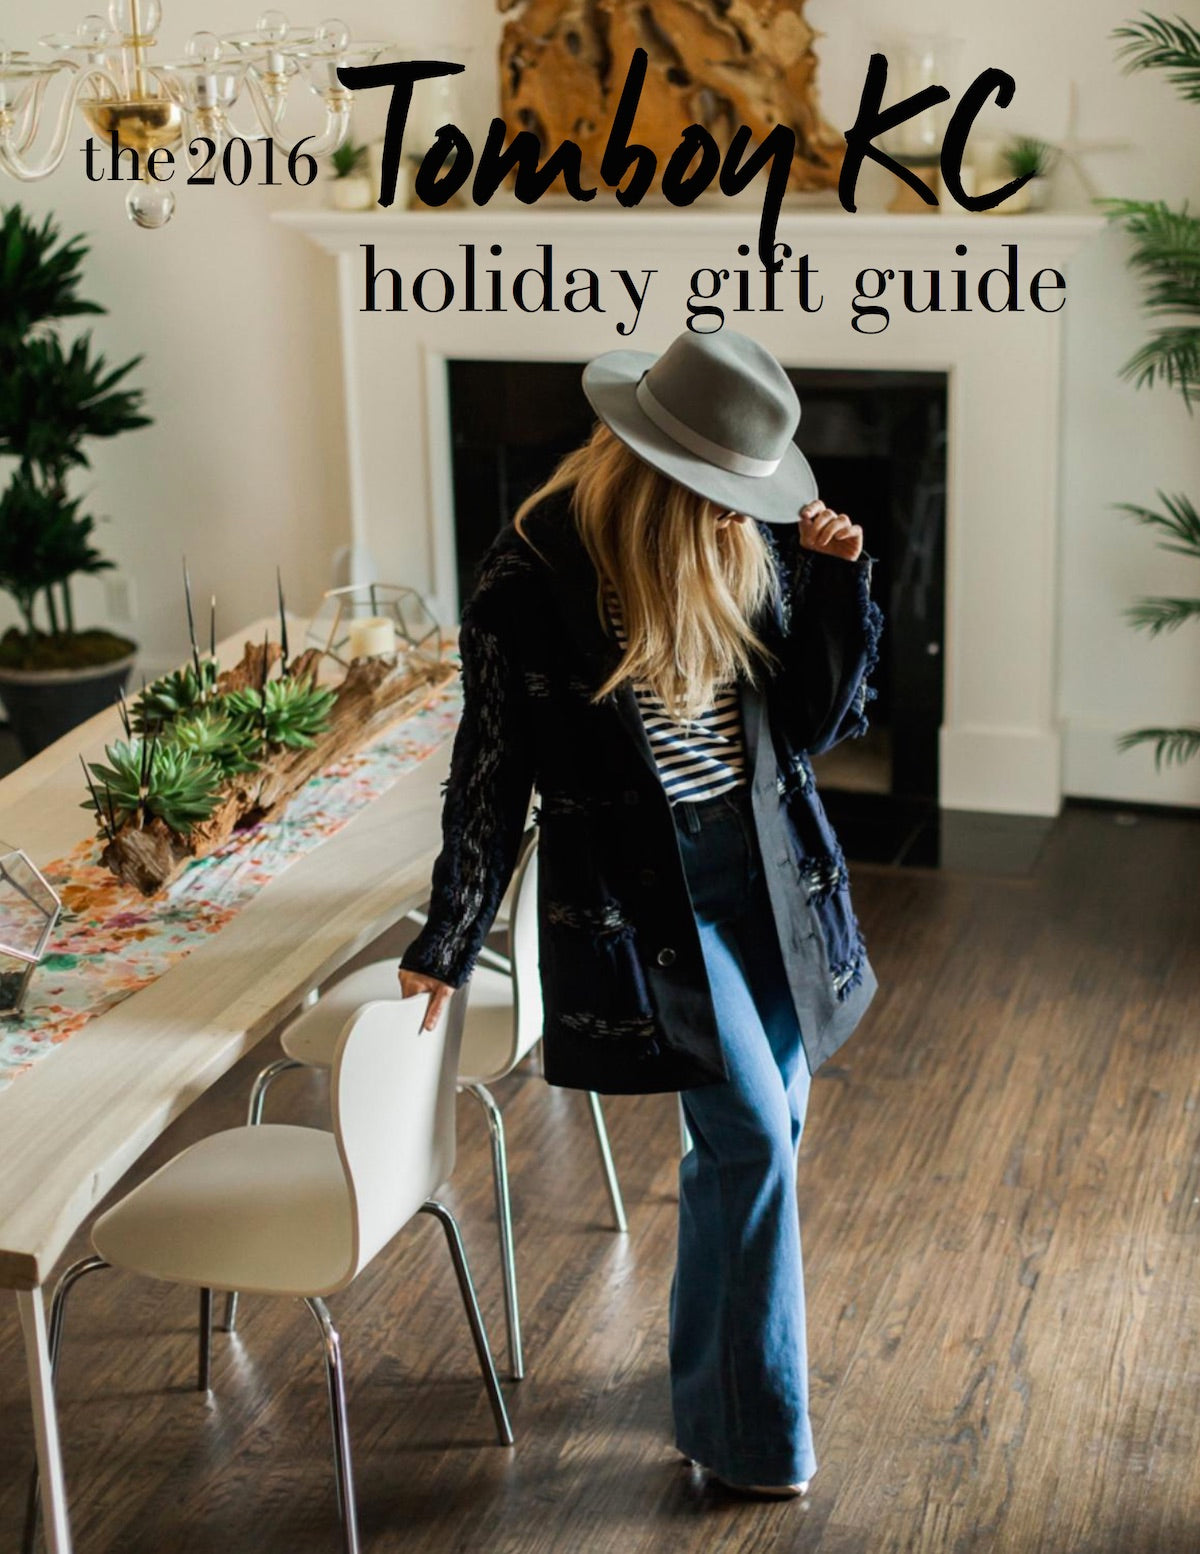 fashion holiday gift guide 2016 - tomboy kc